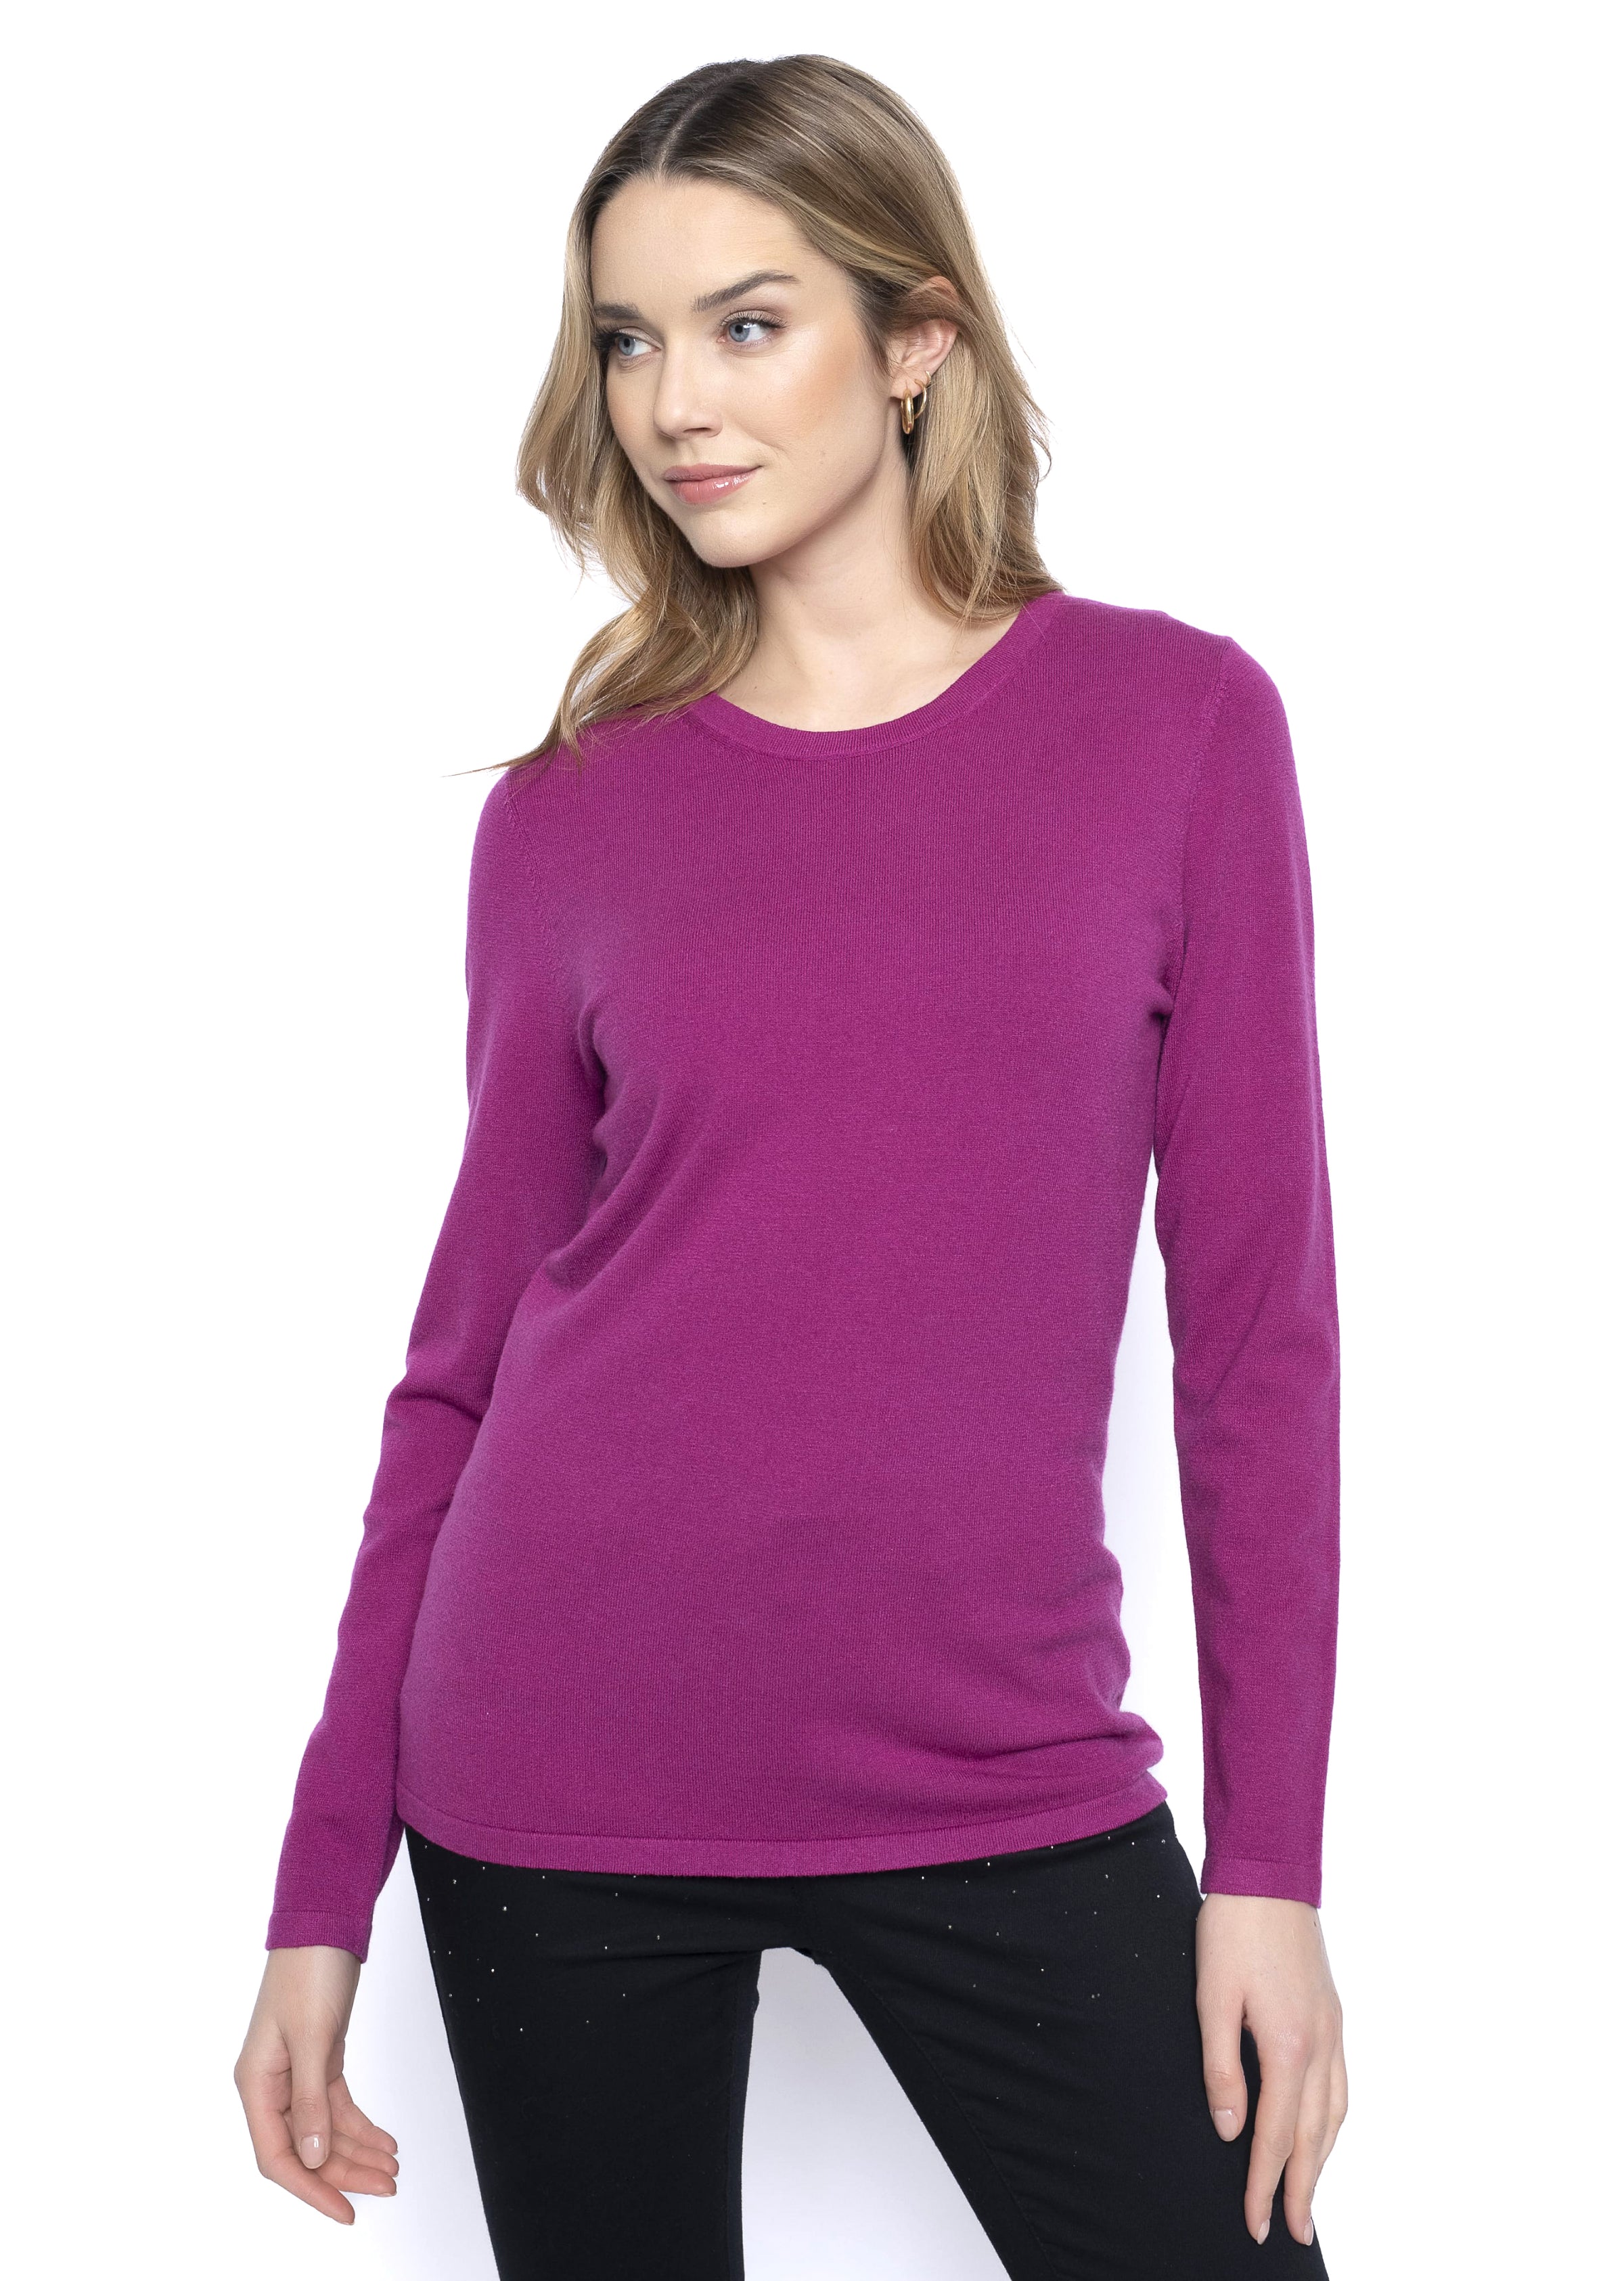 Crew Neck Long Sleeve Layering Top - Shop Now!